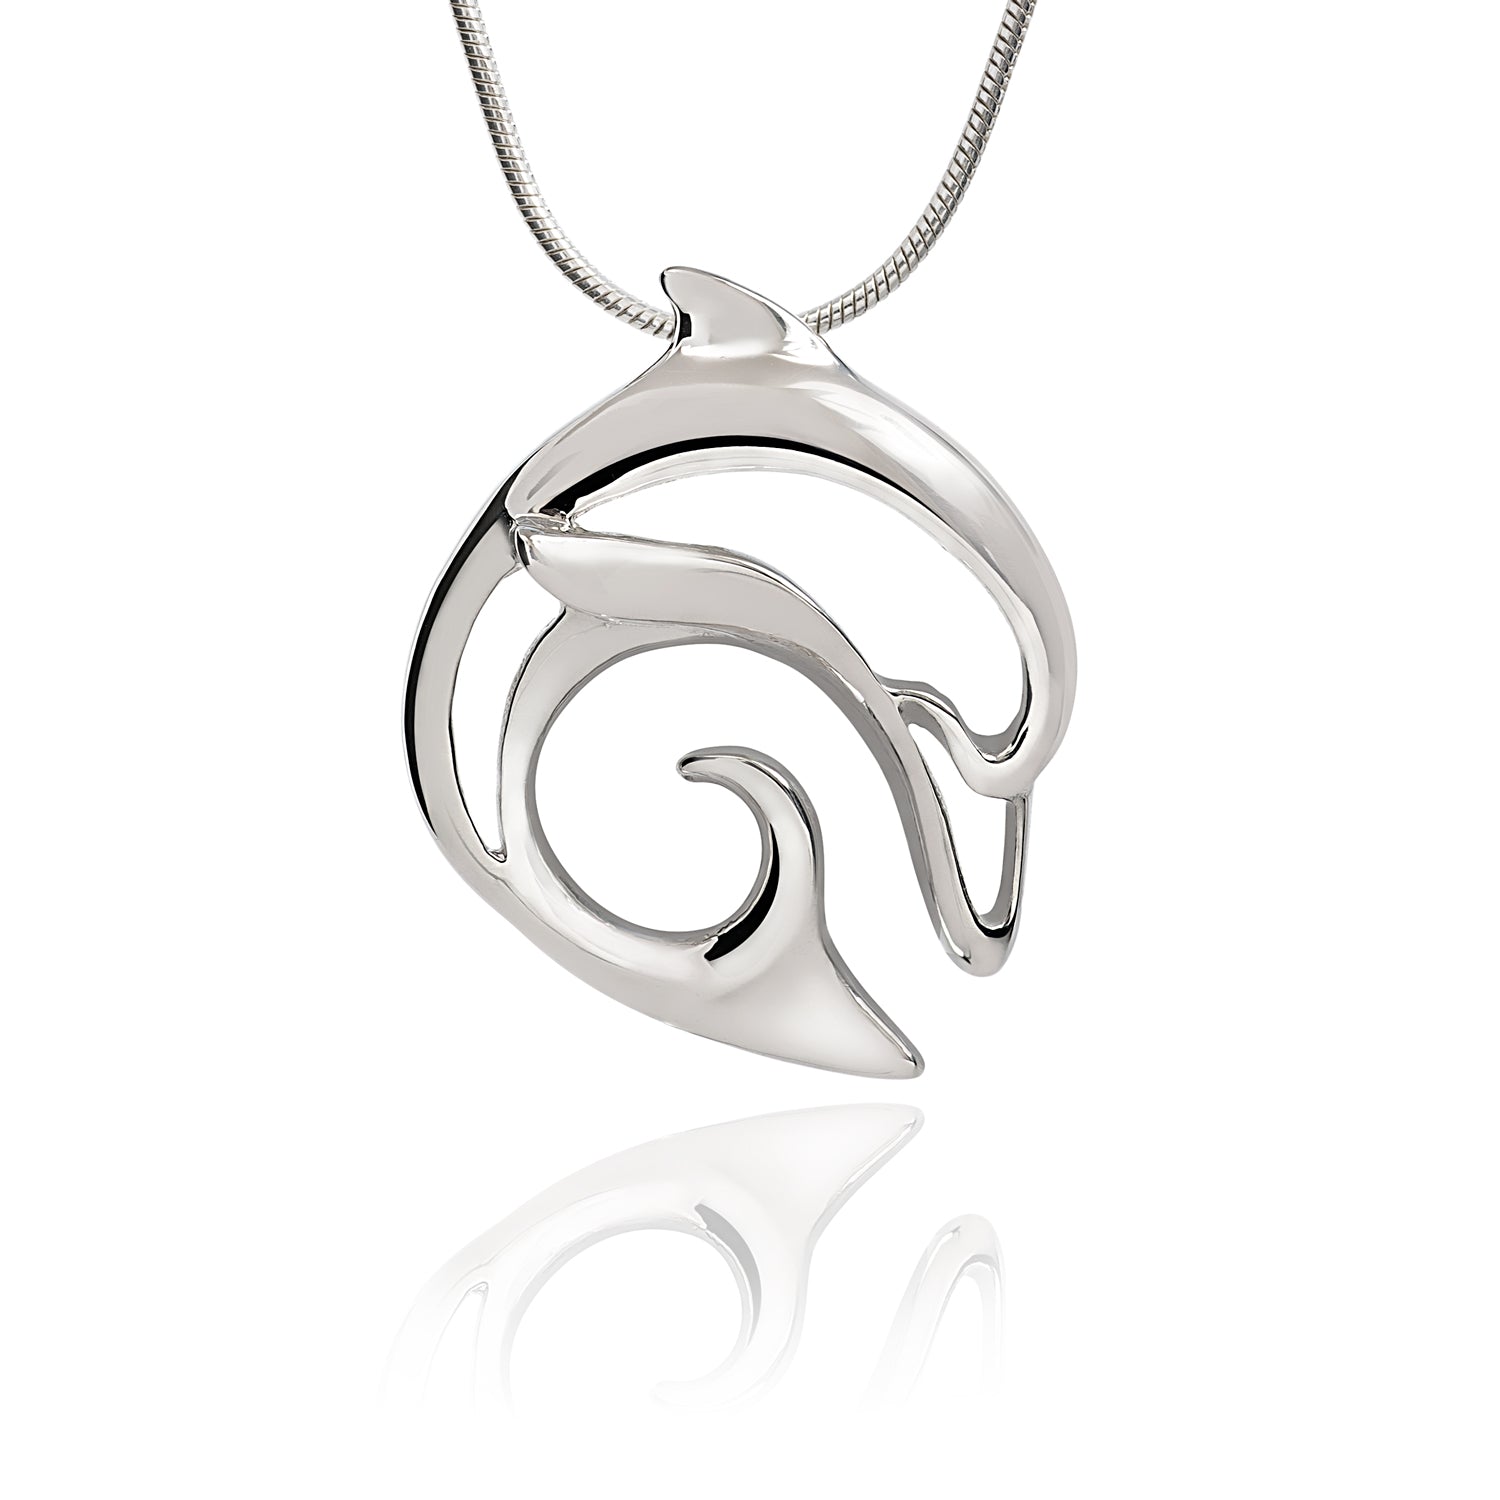 Nautical Jewelry Sterling Silver Dolphin and Hook Pendant PEDO22ss -  Churchwell's Jewelers